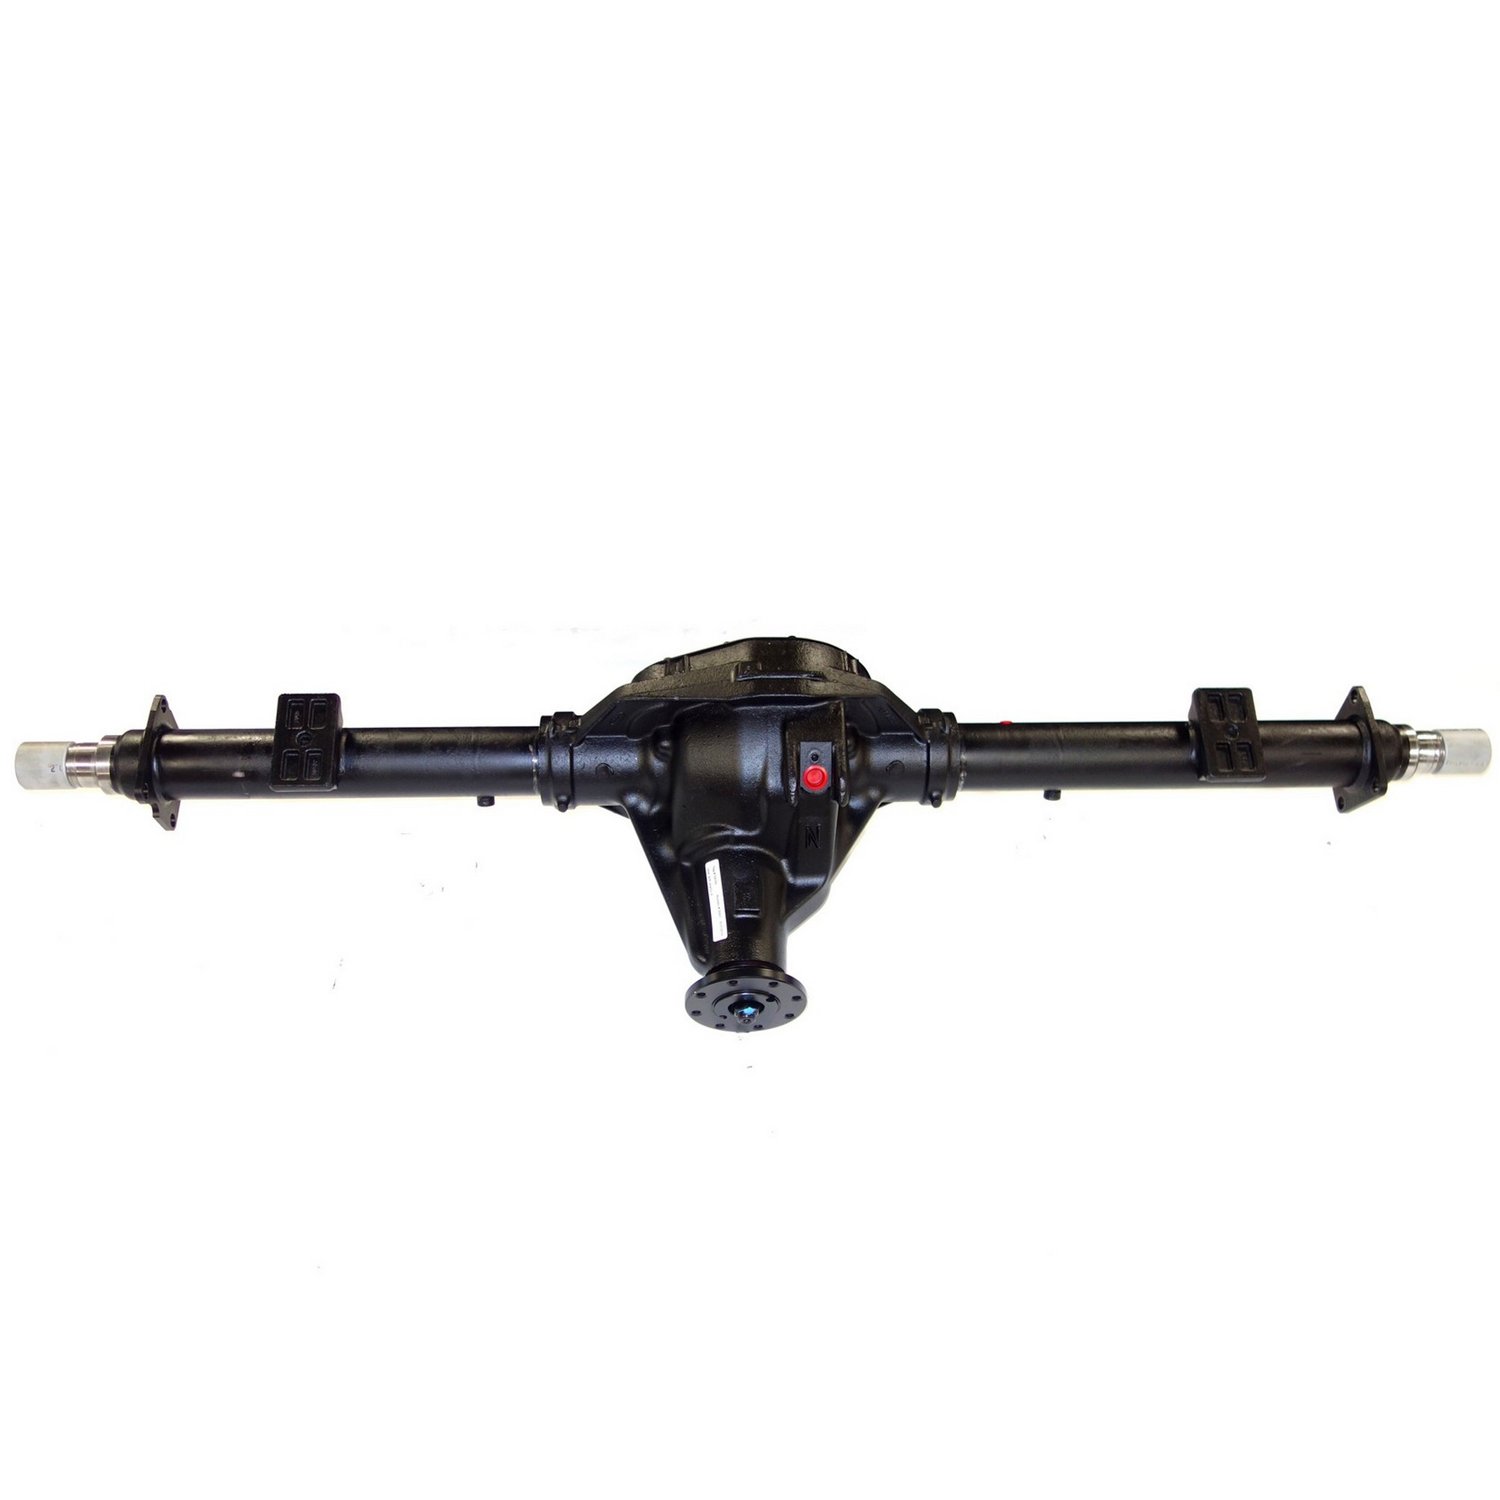 Remanufactured Complete Axle Assy for 10.5" 08-10 F250 & F350, 6.4l, SRW, 3.31, Posi LSD